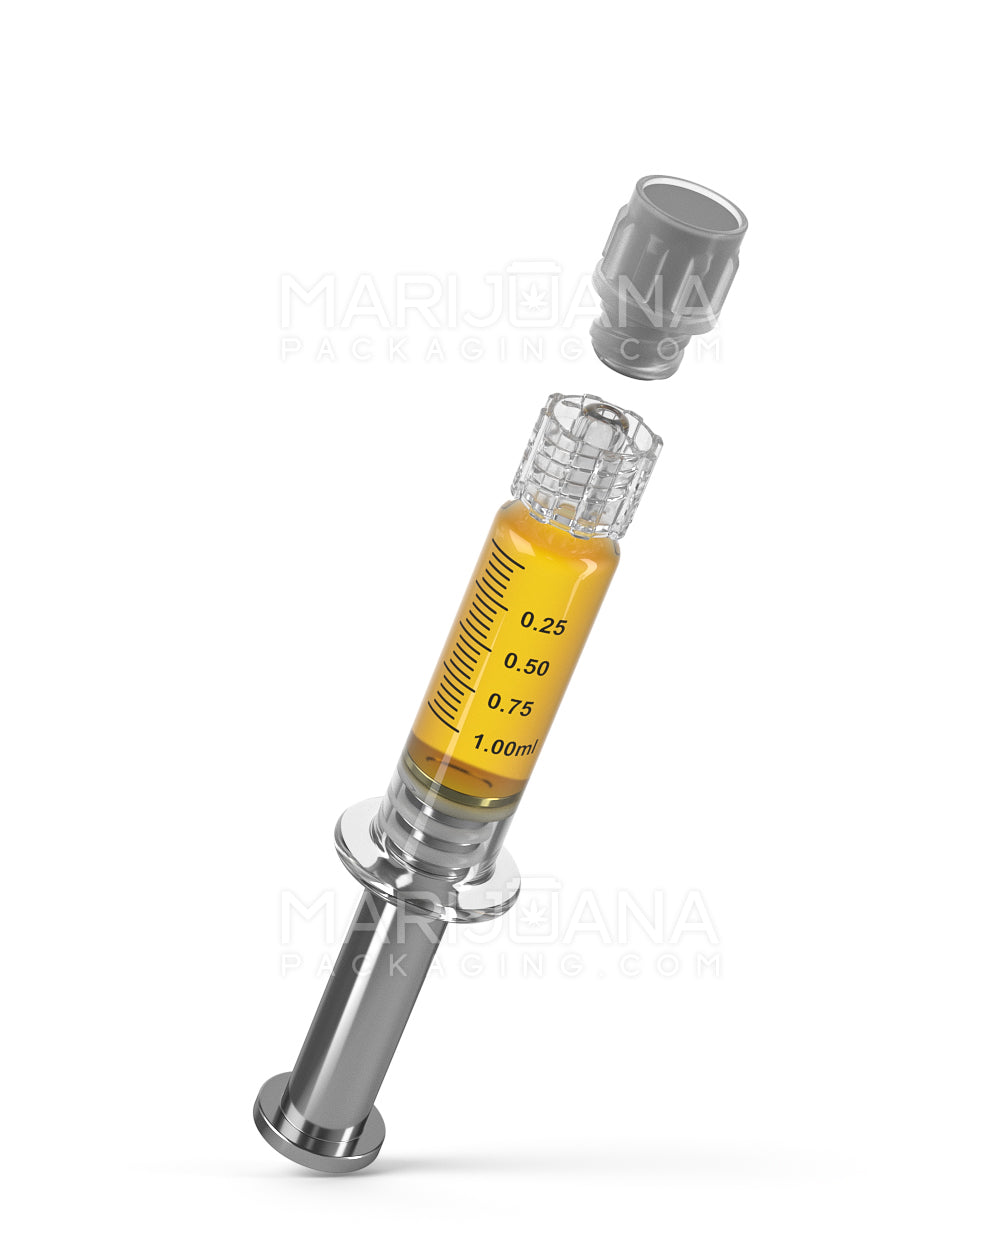 Luer Lock | Glass Dab Applicator Syringes w/ Metal Plunger | 1mL - 0.25mL Increments - 100 Count - 6